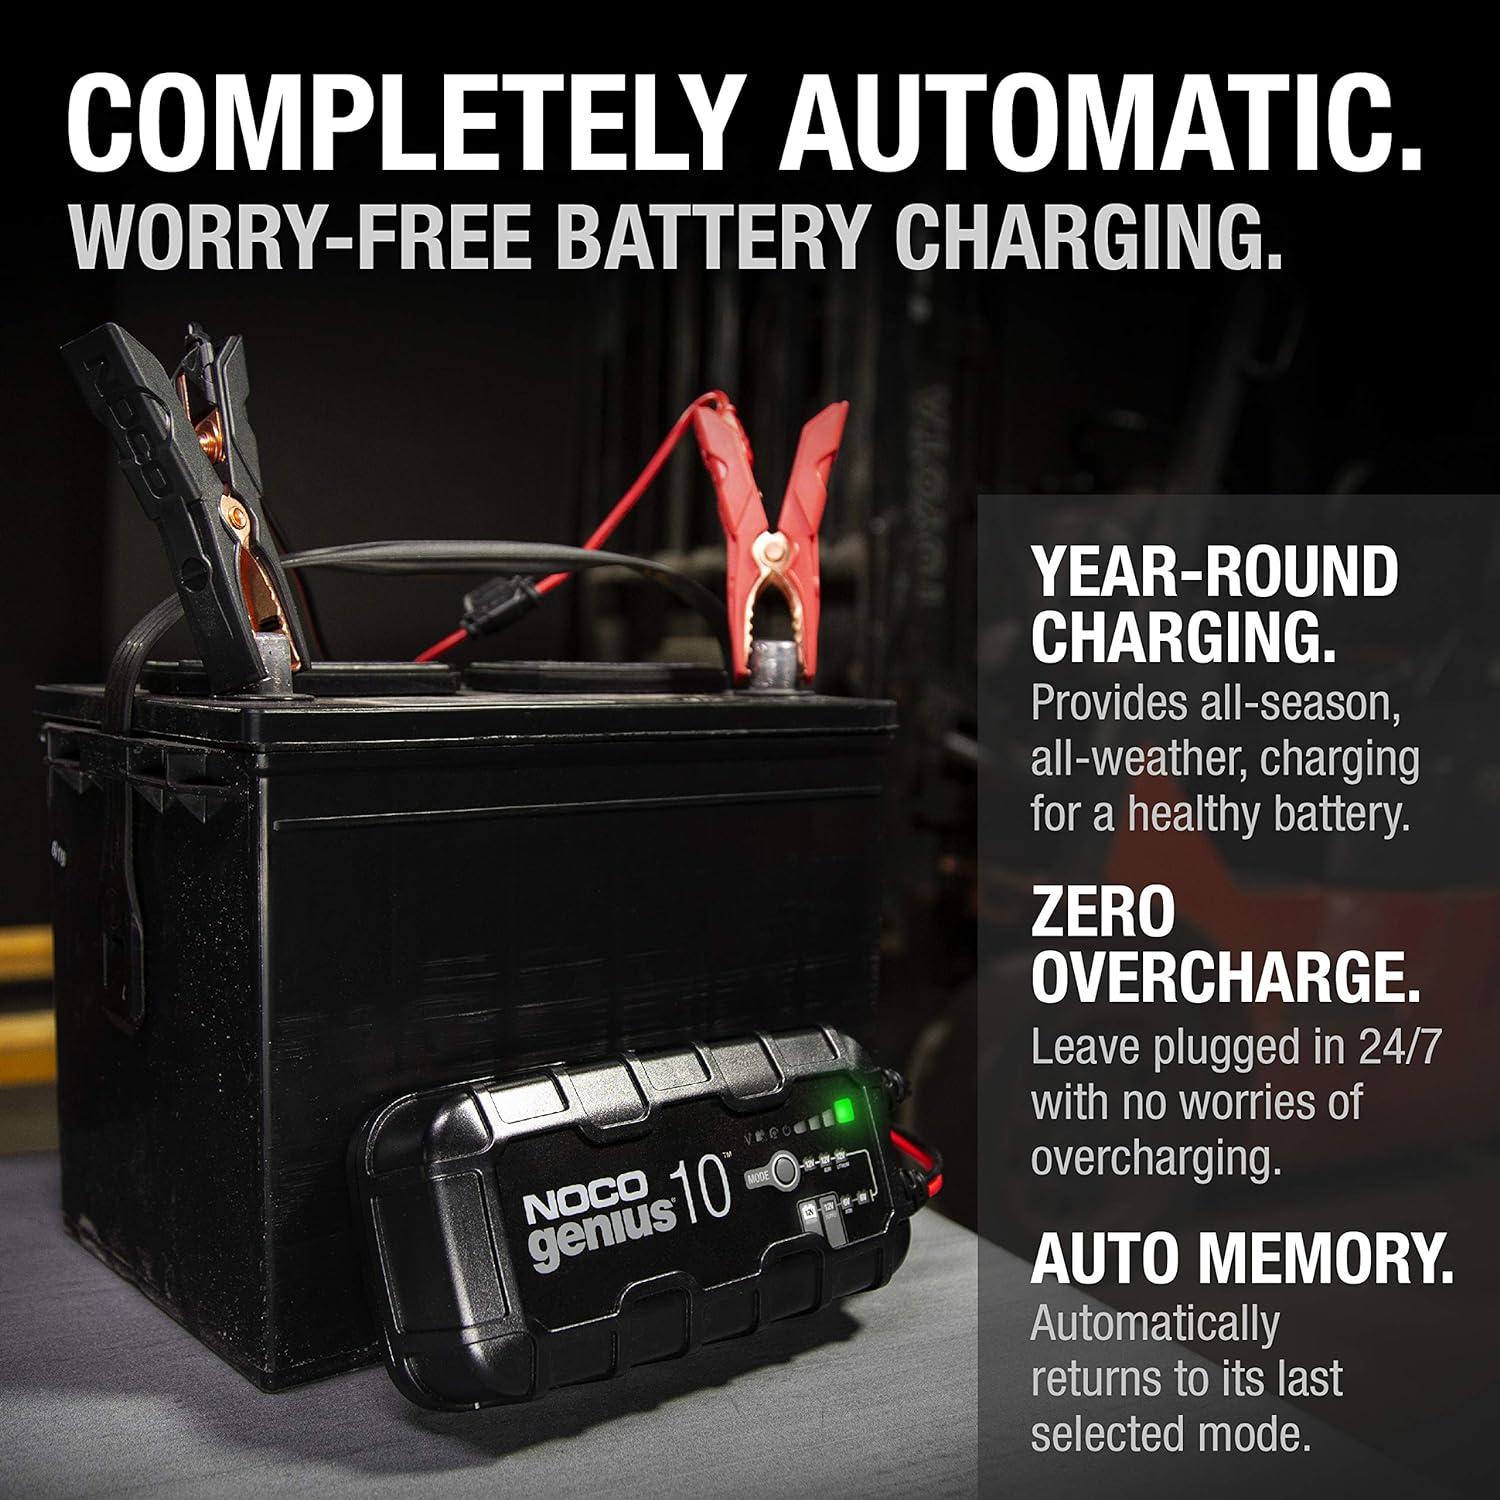 NOCO GENIUS10 Battery Charger Review